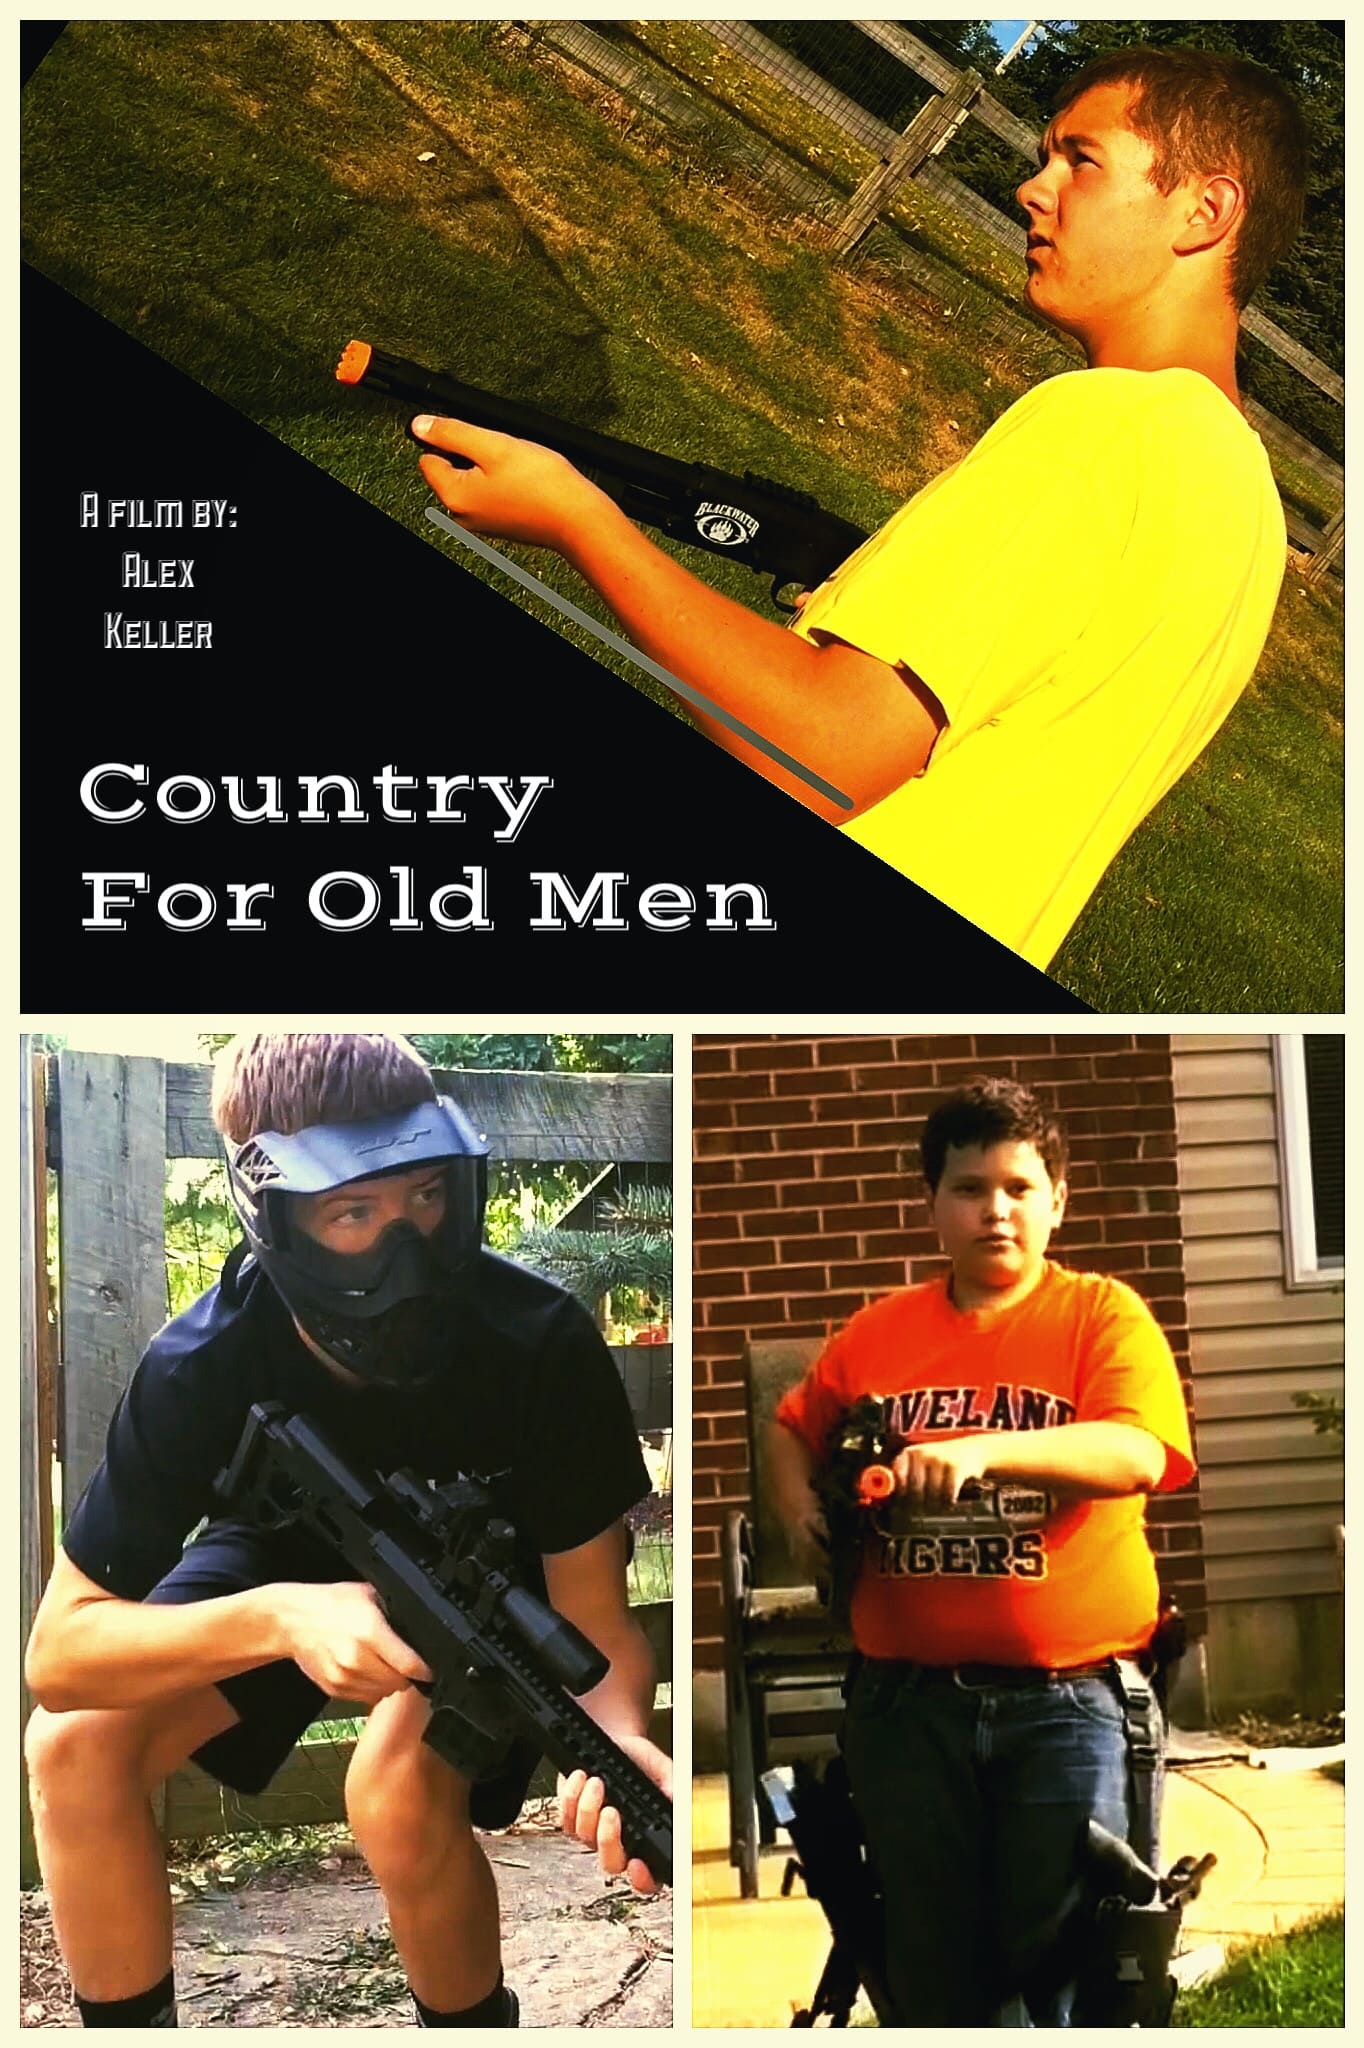 Country For Old Men